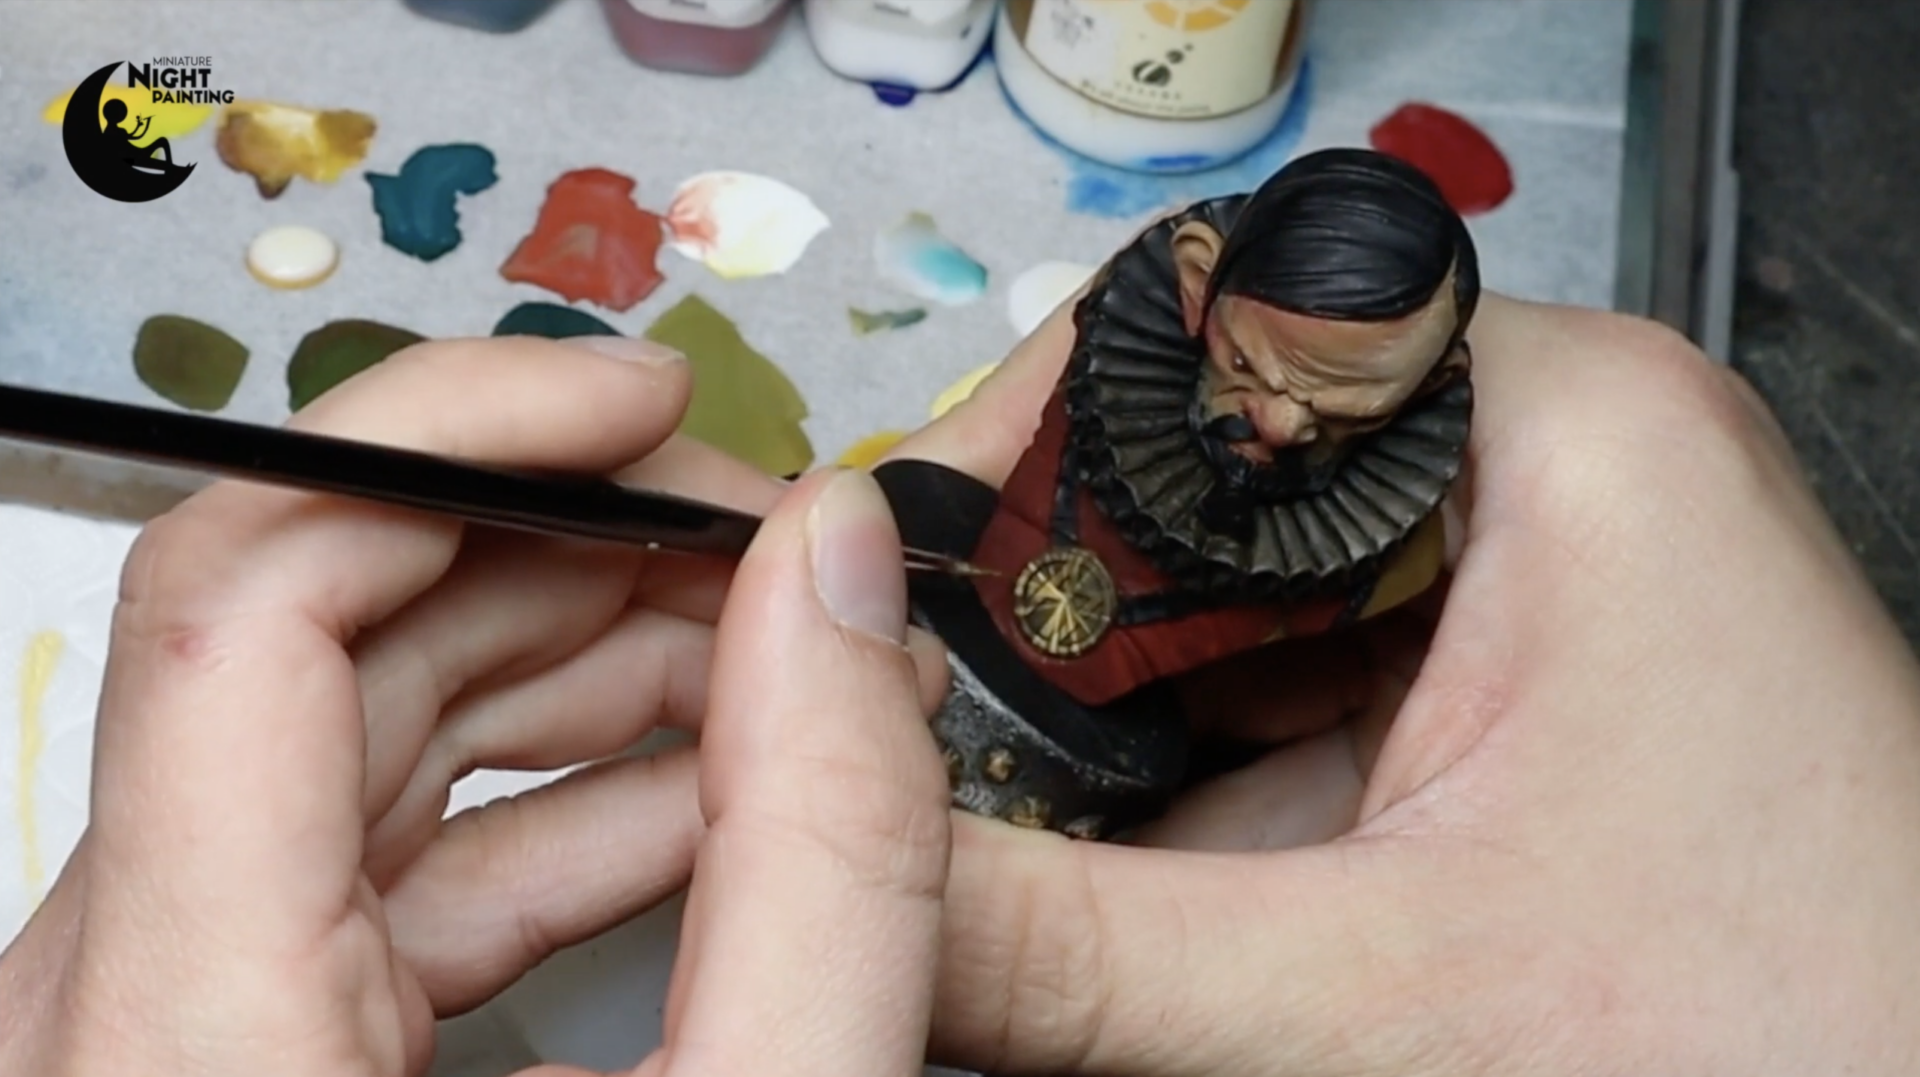 Lukas Zaba painting NMM on Moggy bust